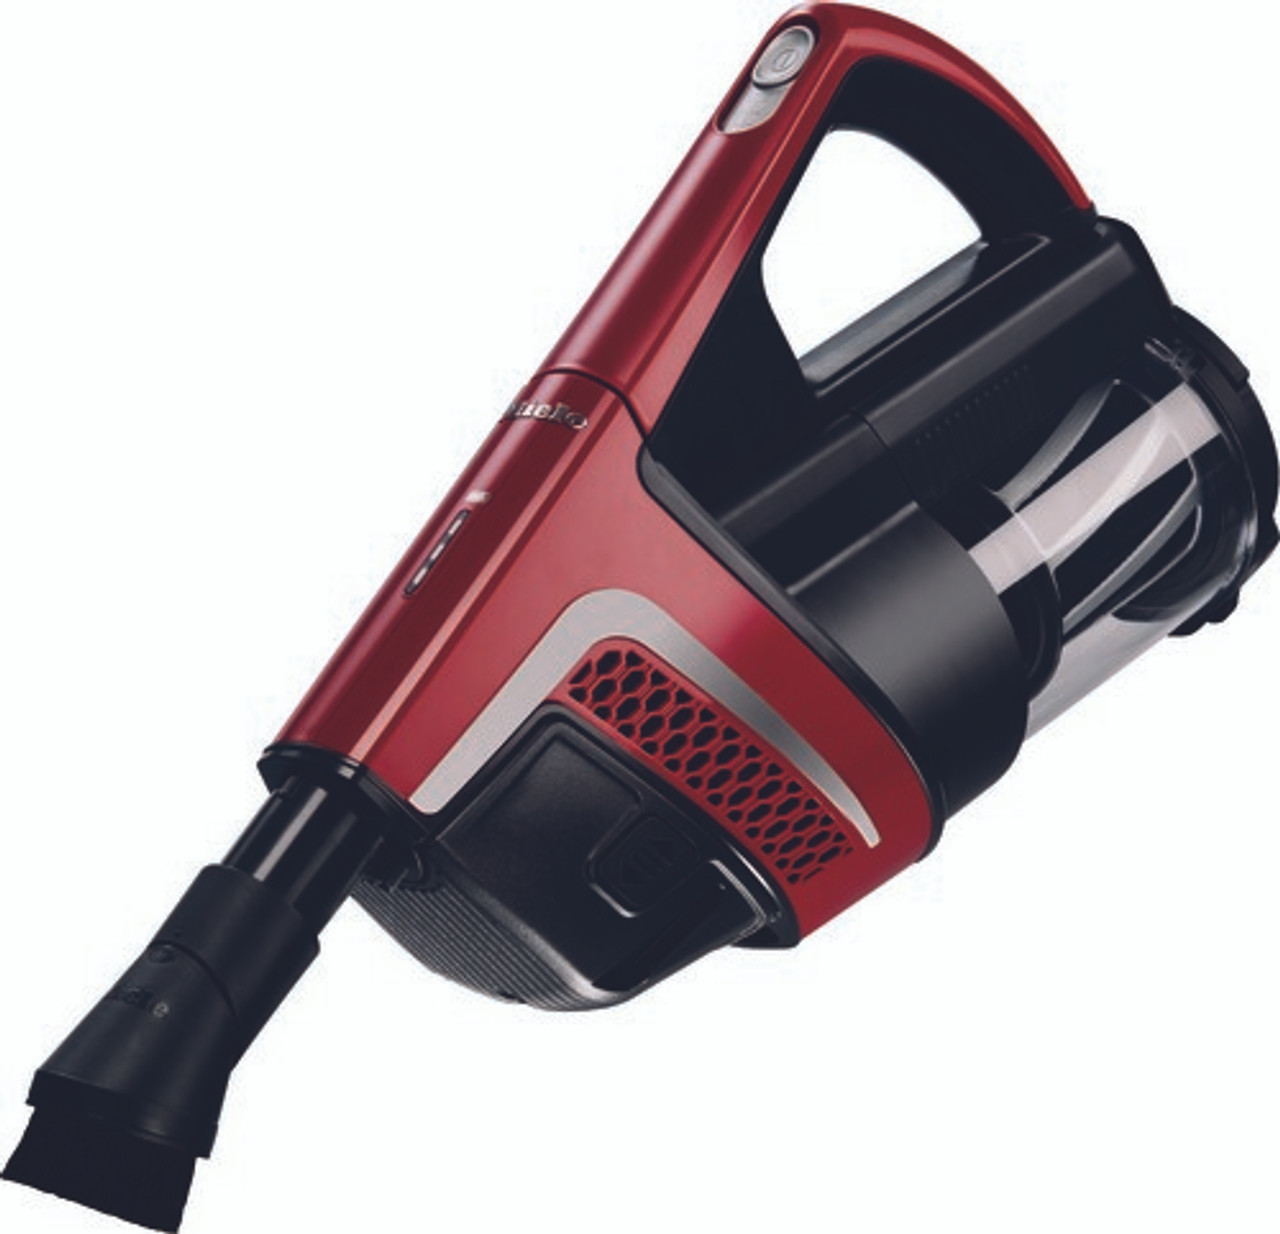 Vacuum Triflex | Cordless Cleaner Ruby Red HomeCare SMUL0 HX1 Miele